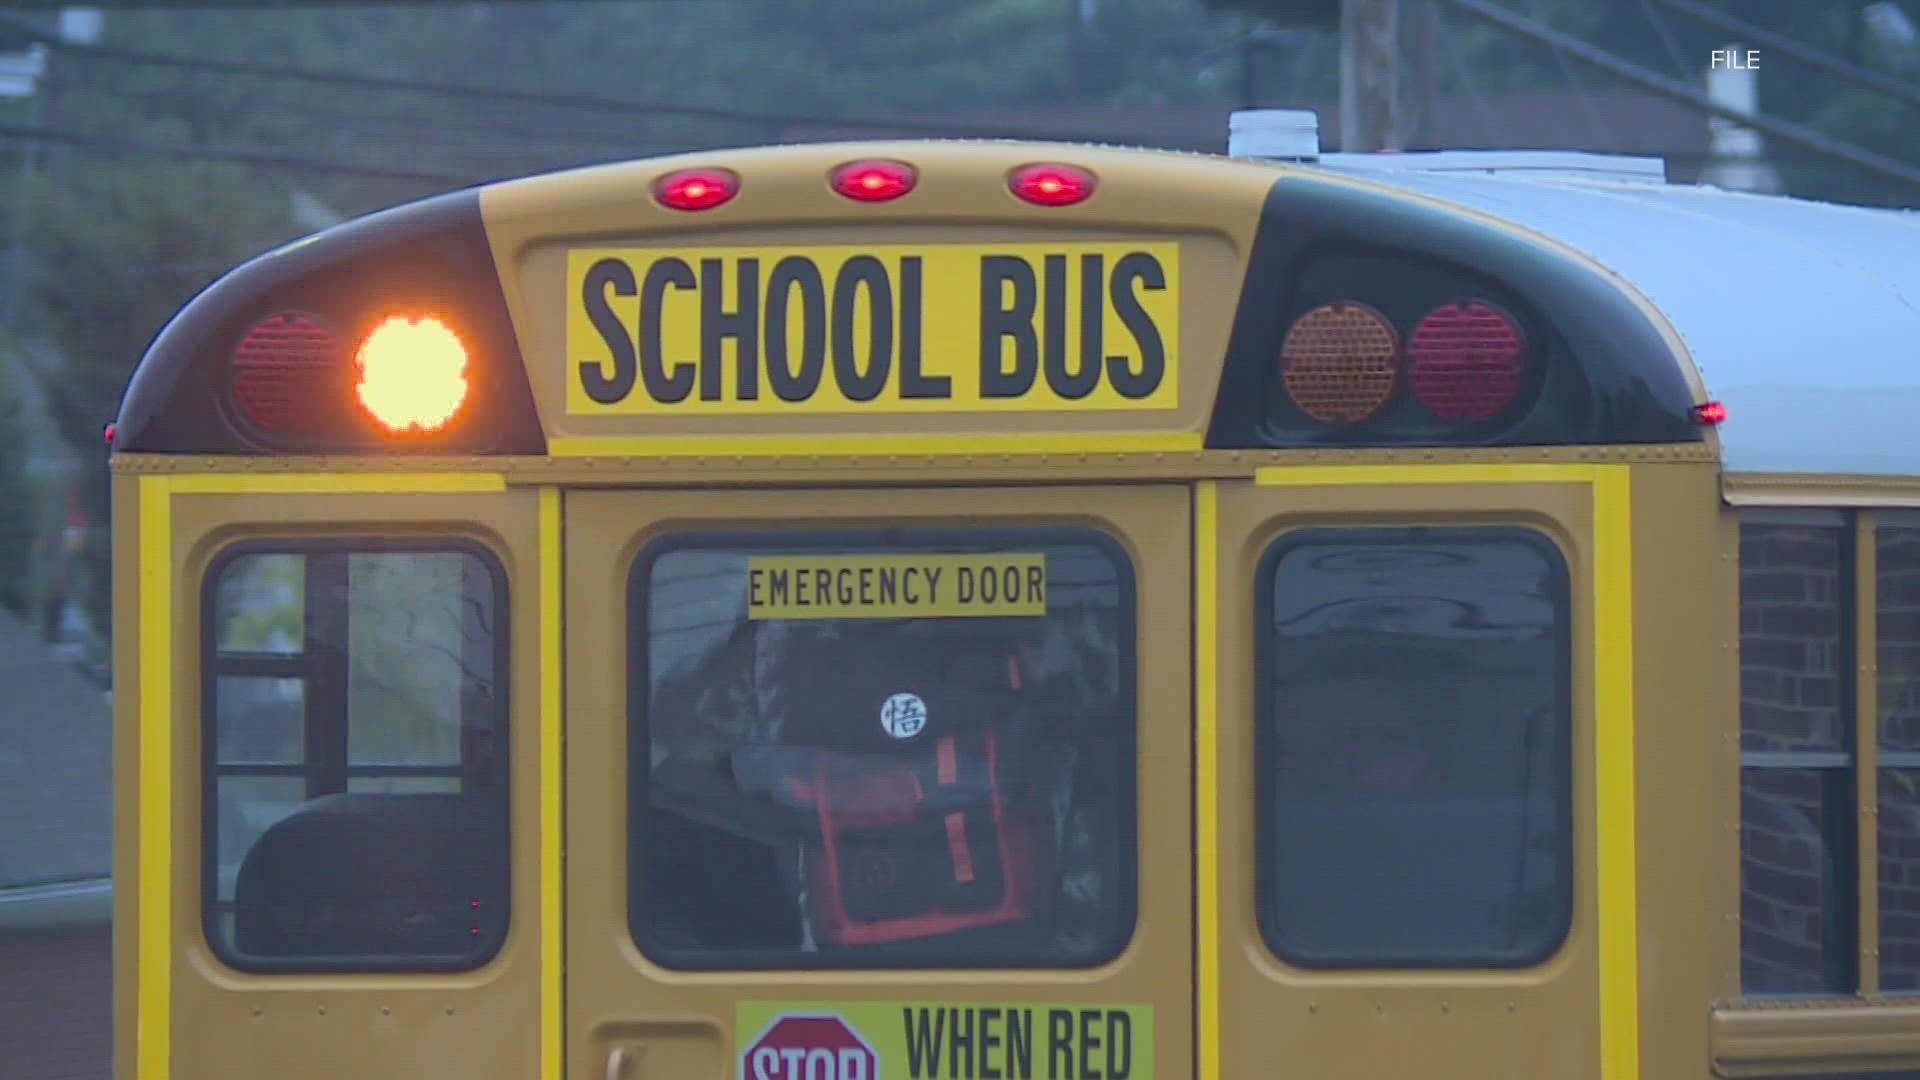 JCPS says an investigation is underway after they say an adult threatened a bus of middle school students.